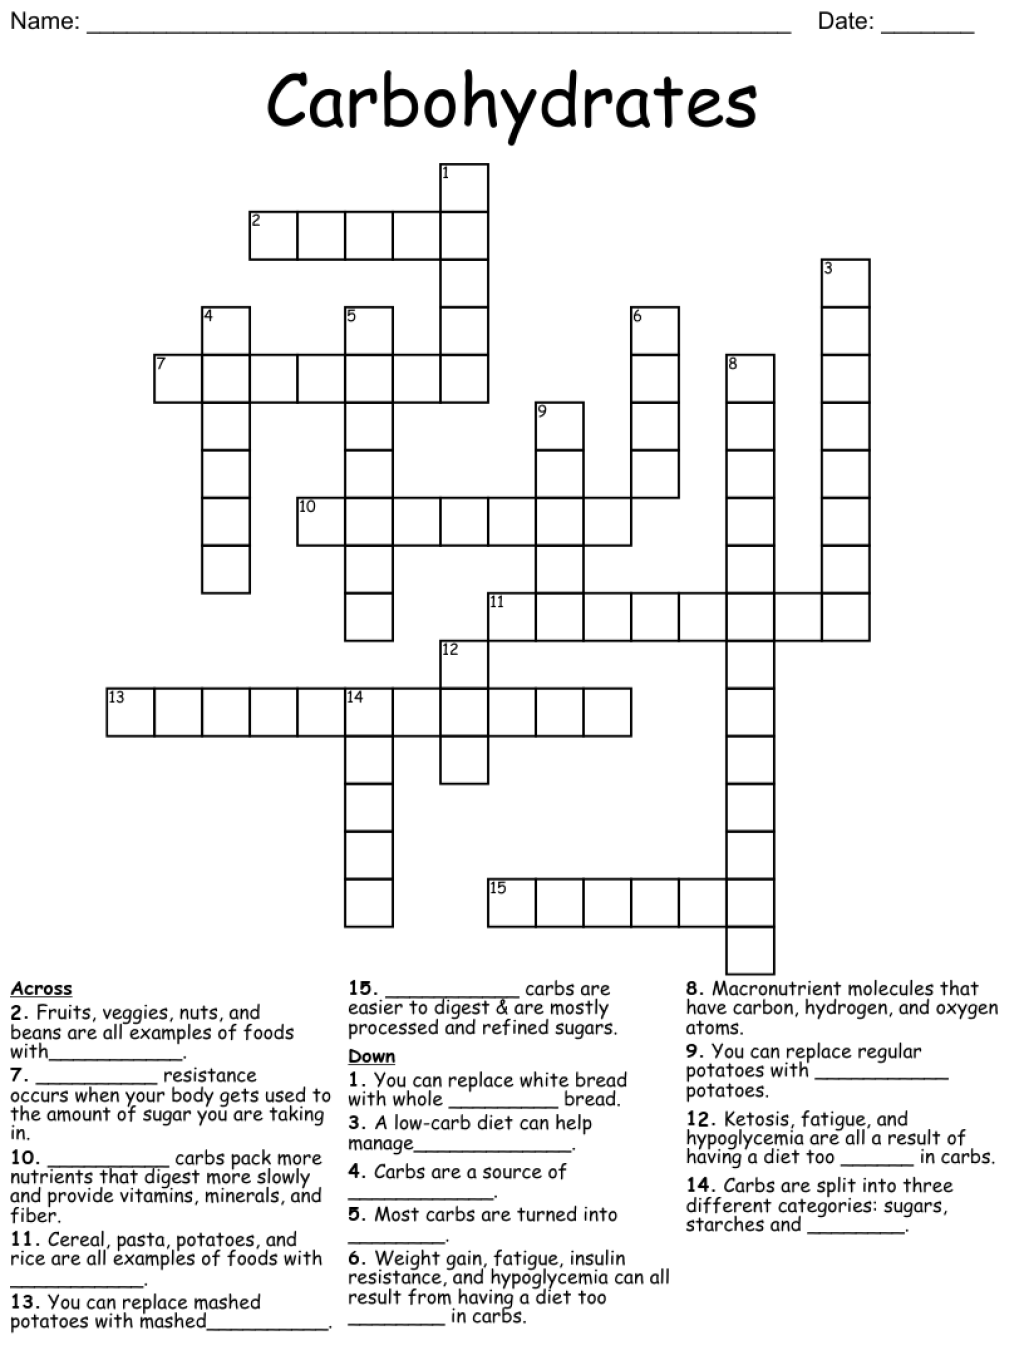 Picture of: Carbohydrates Crossword – WordMint